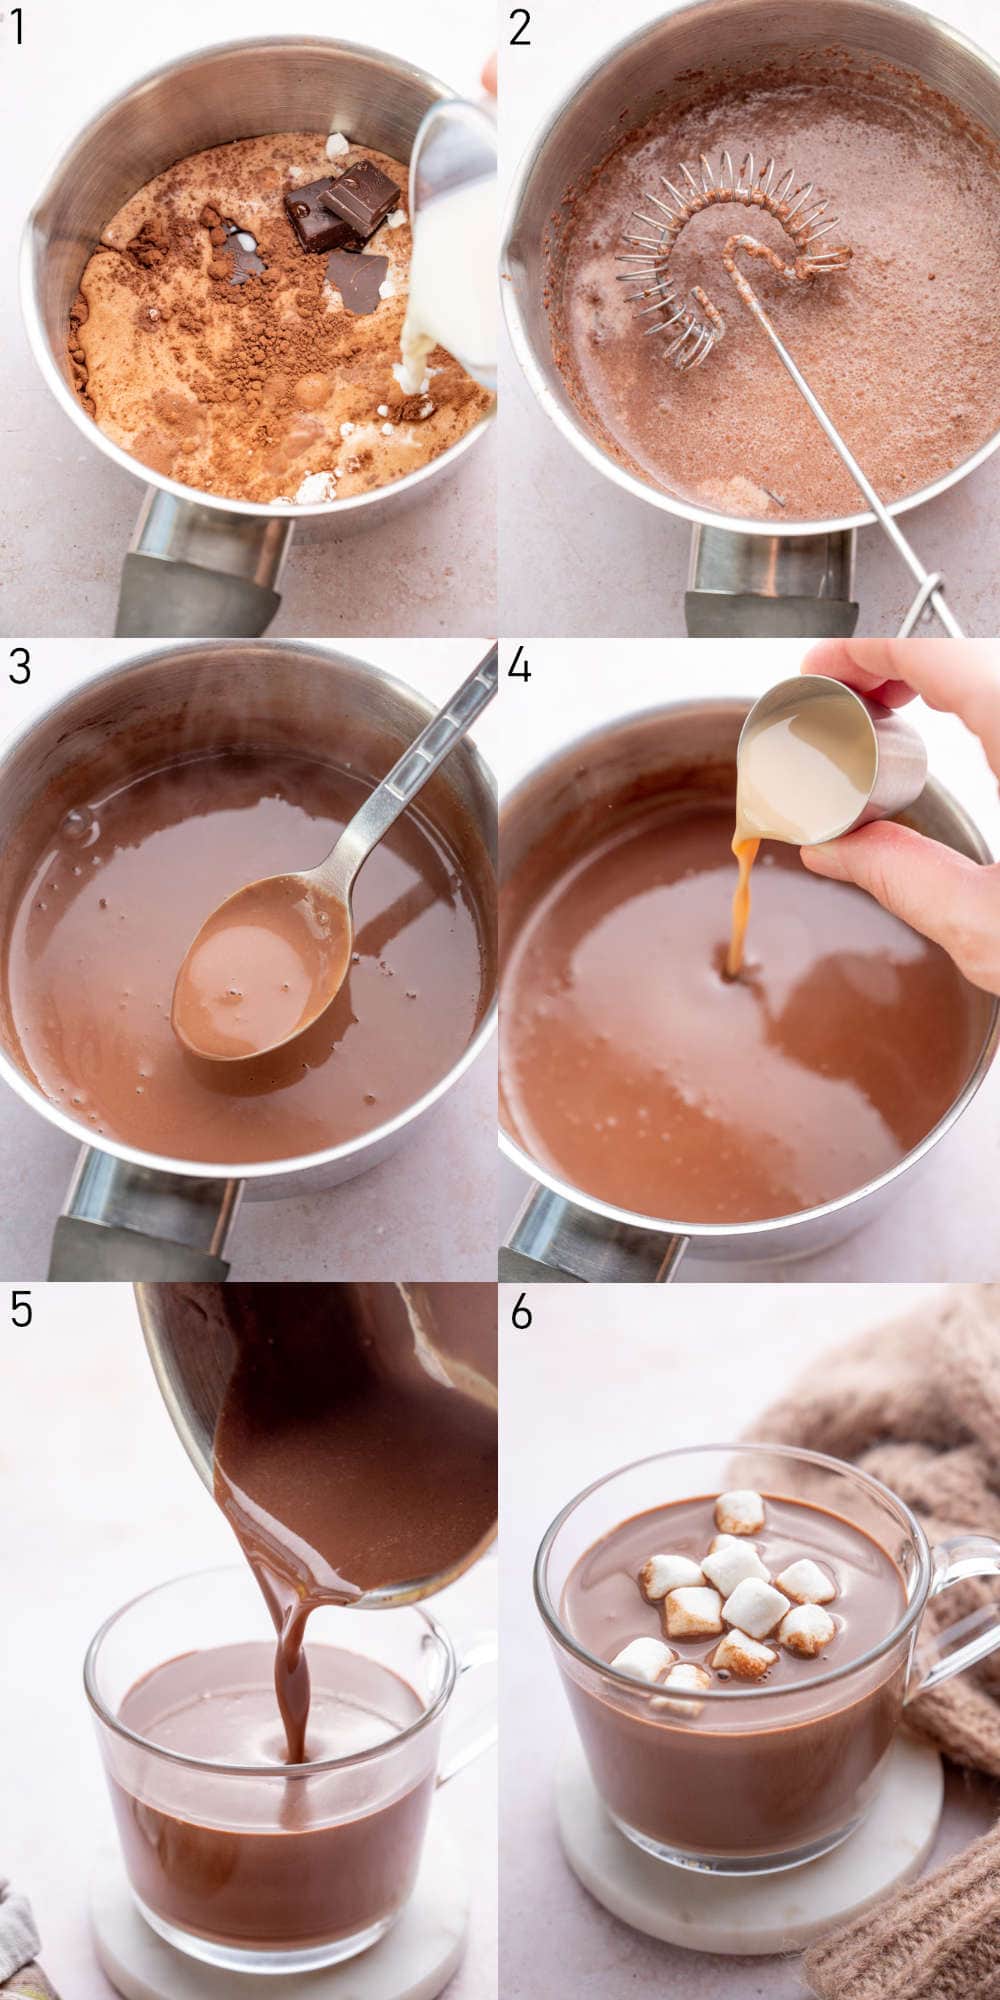 A collage of 6 photos showing how to prepare Baileys hot chocolate.